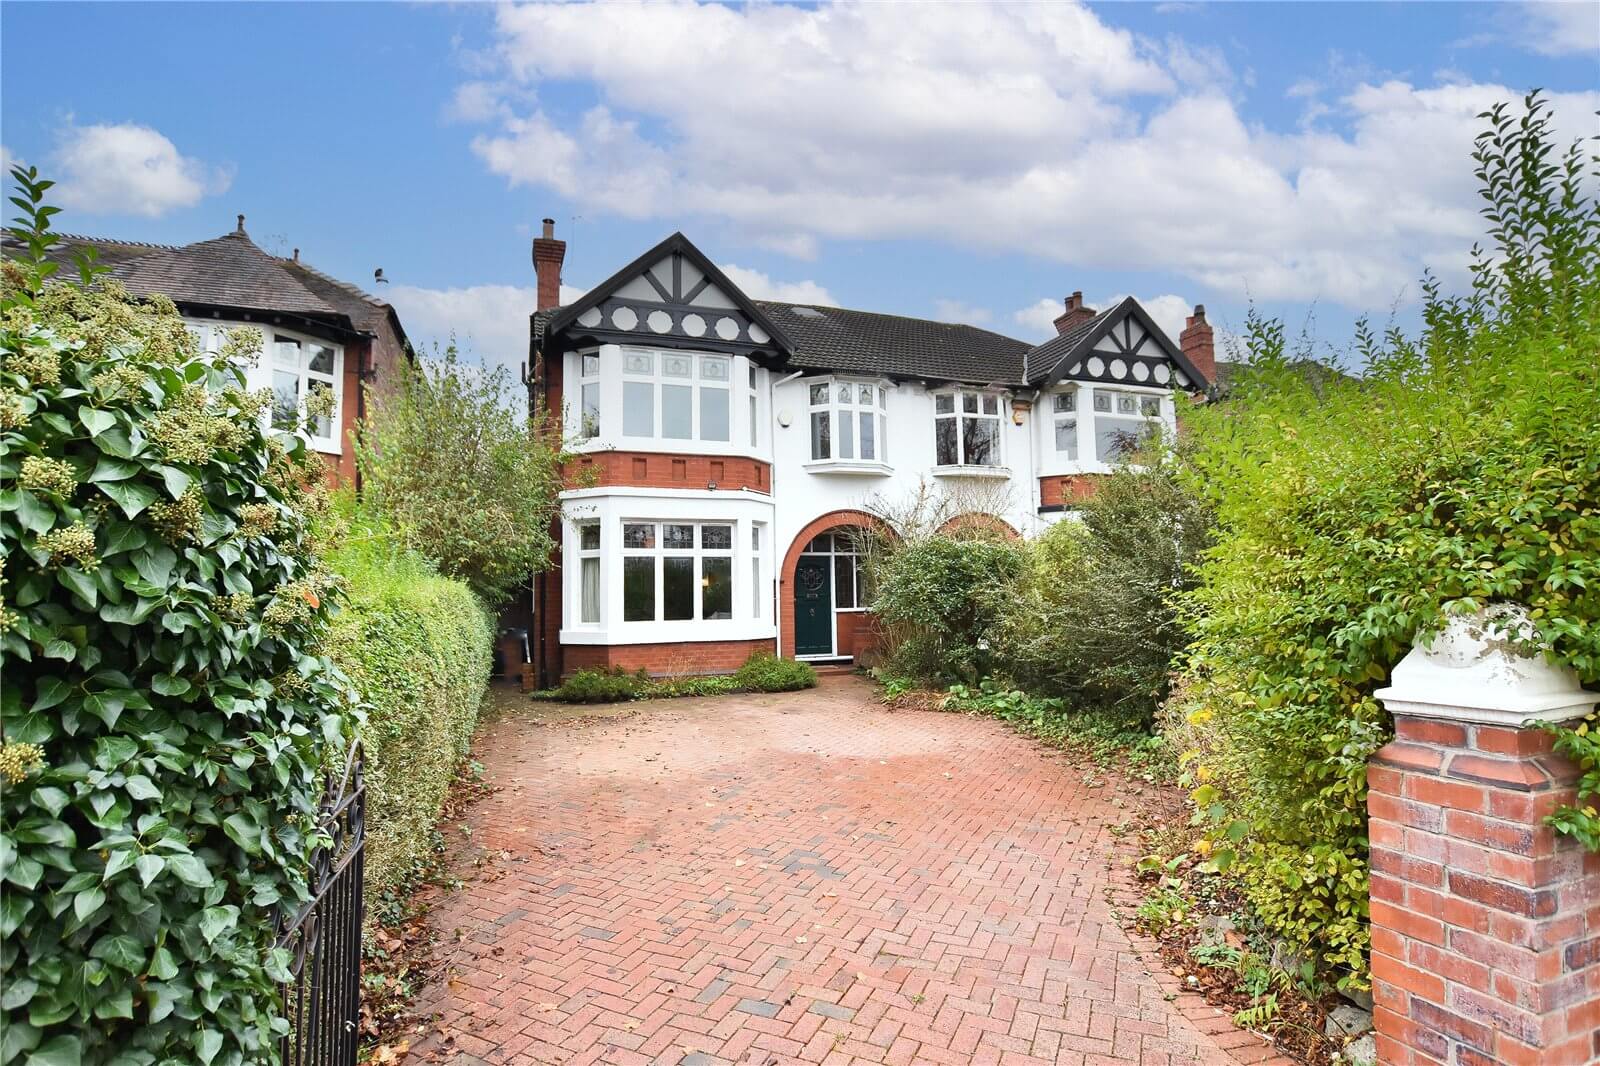 4 Bedroom House for Sale in Didsbury, Manchester